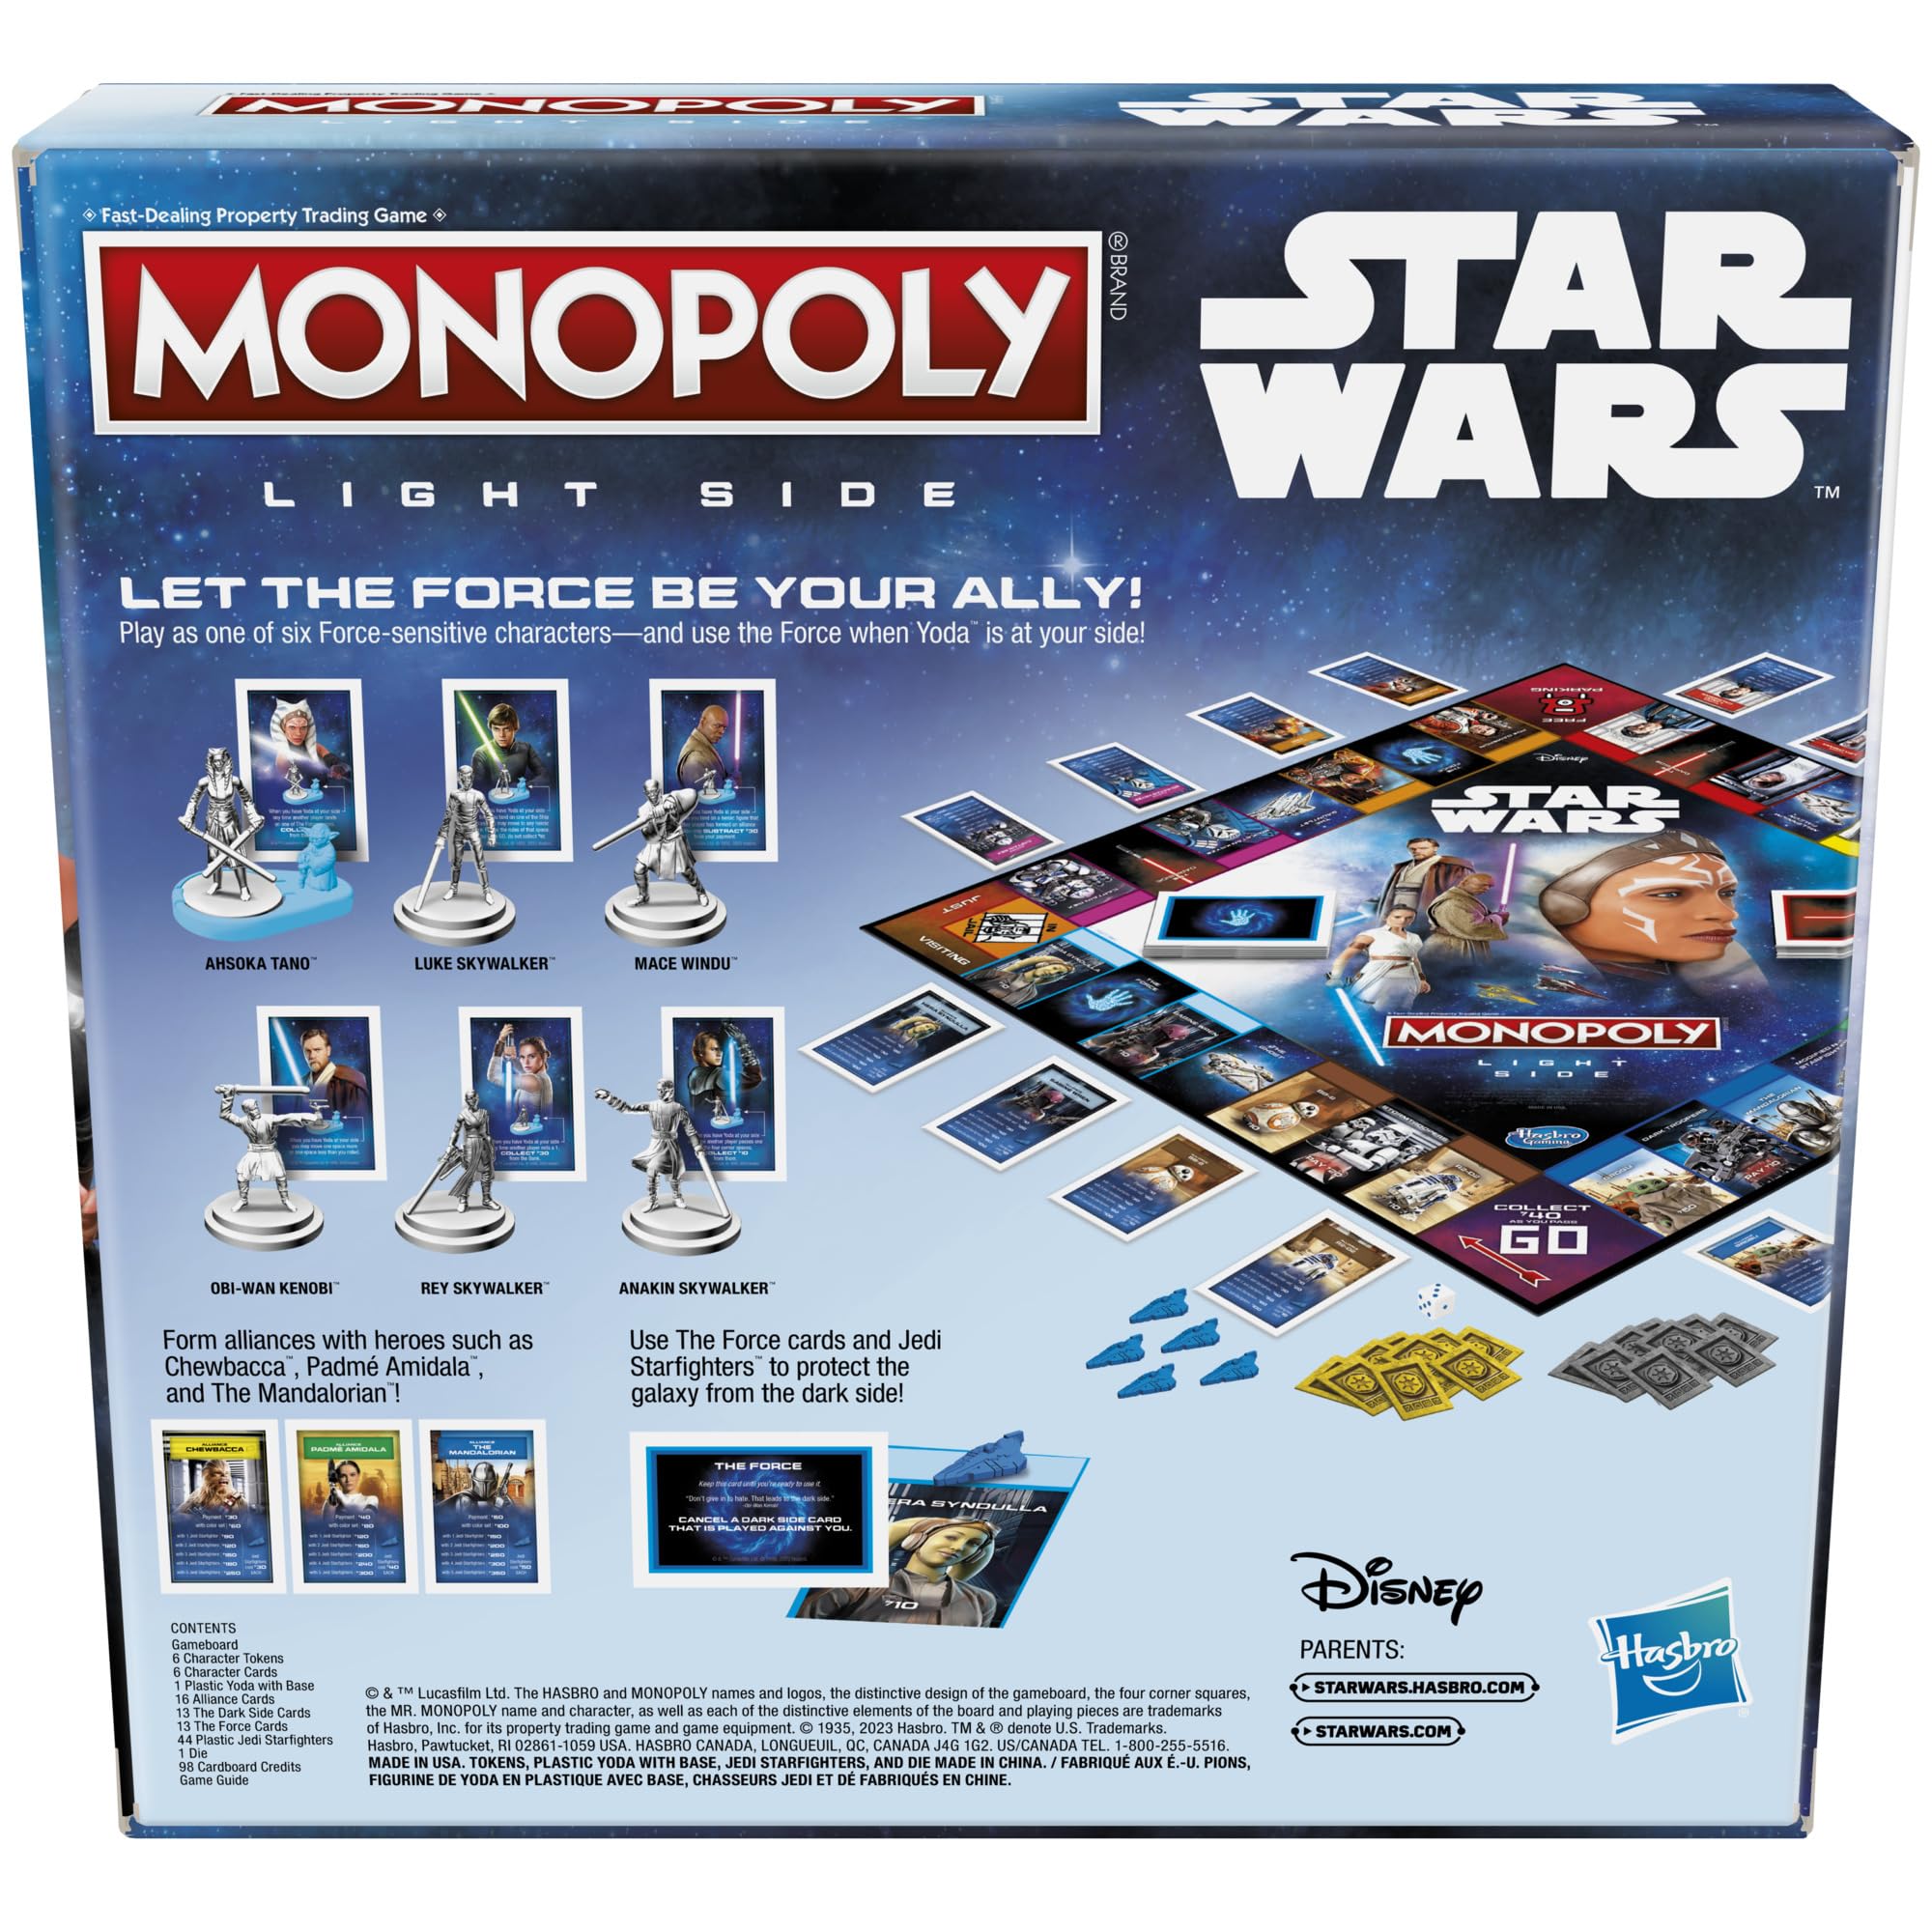 Monopoly: Star Wars Light Side Edition Board Game for Families and Kids Ages 8 and Up, Star Wars Jedi Game for 2-6 Players, Family Games